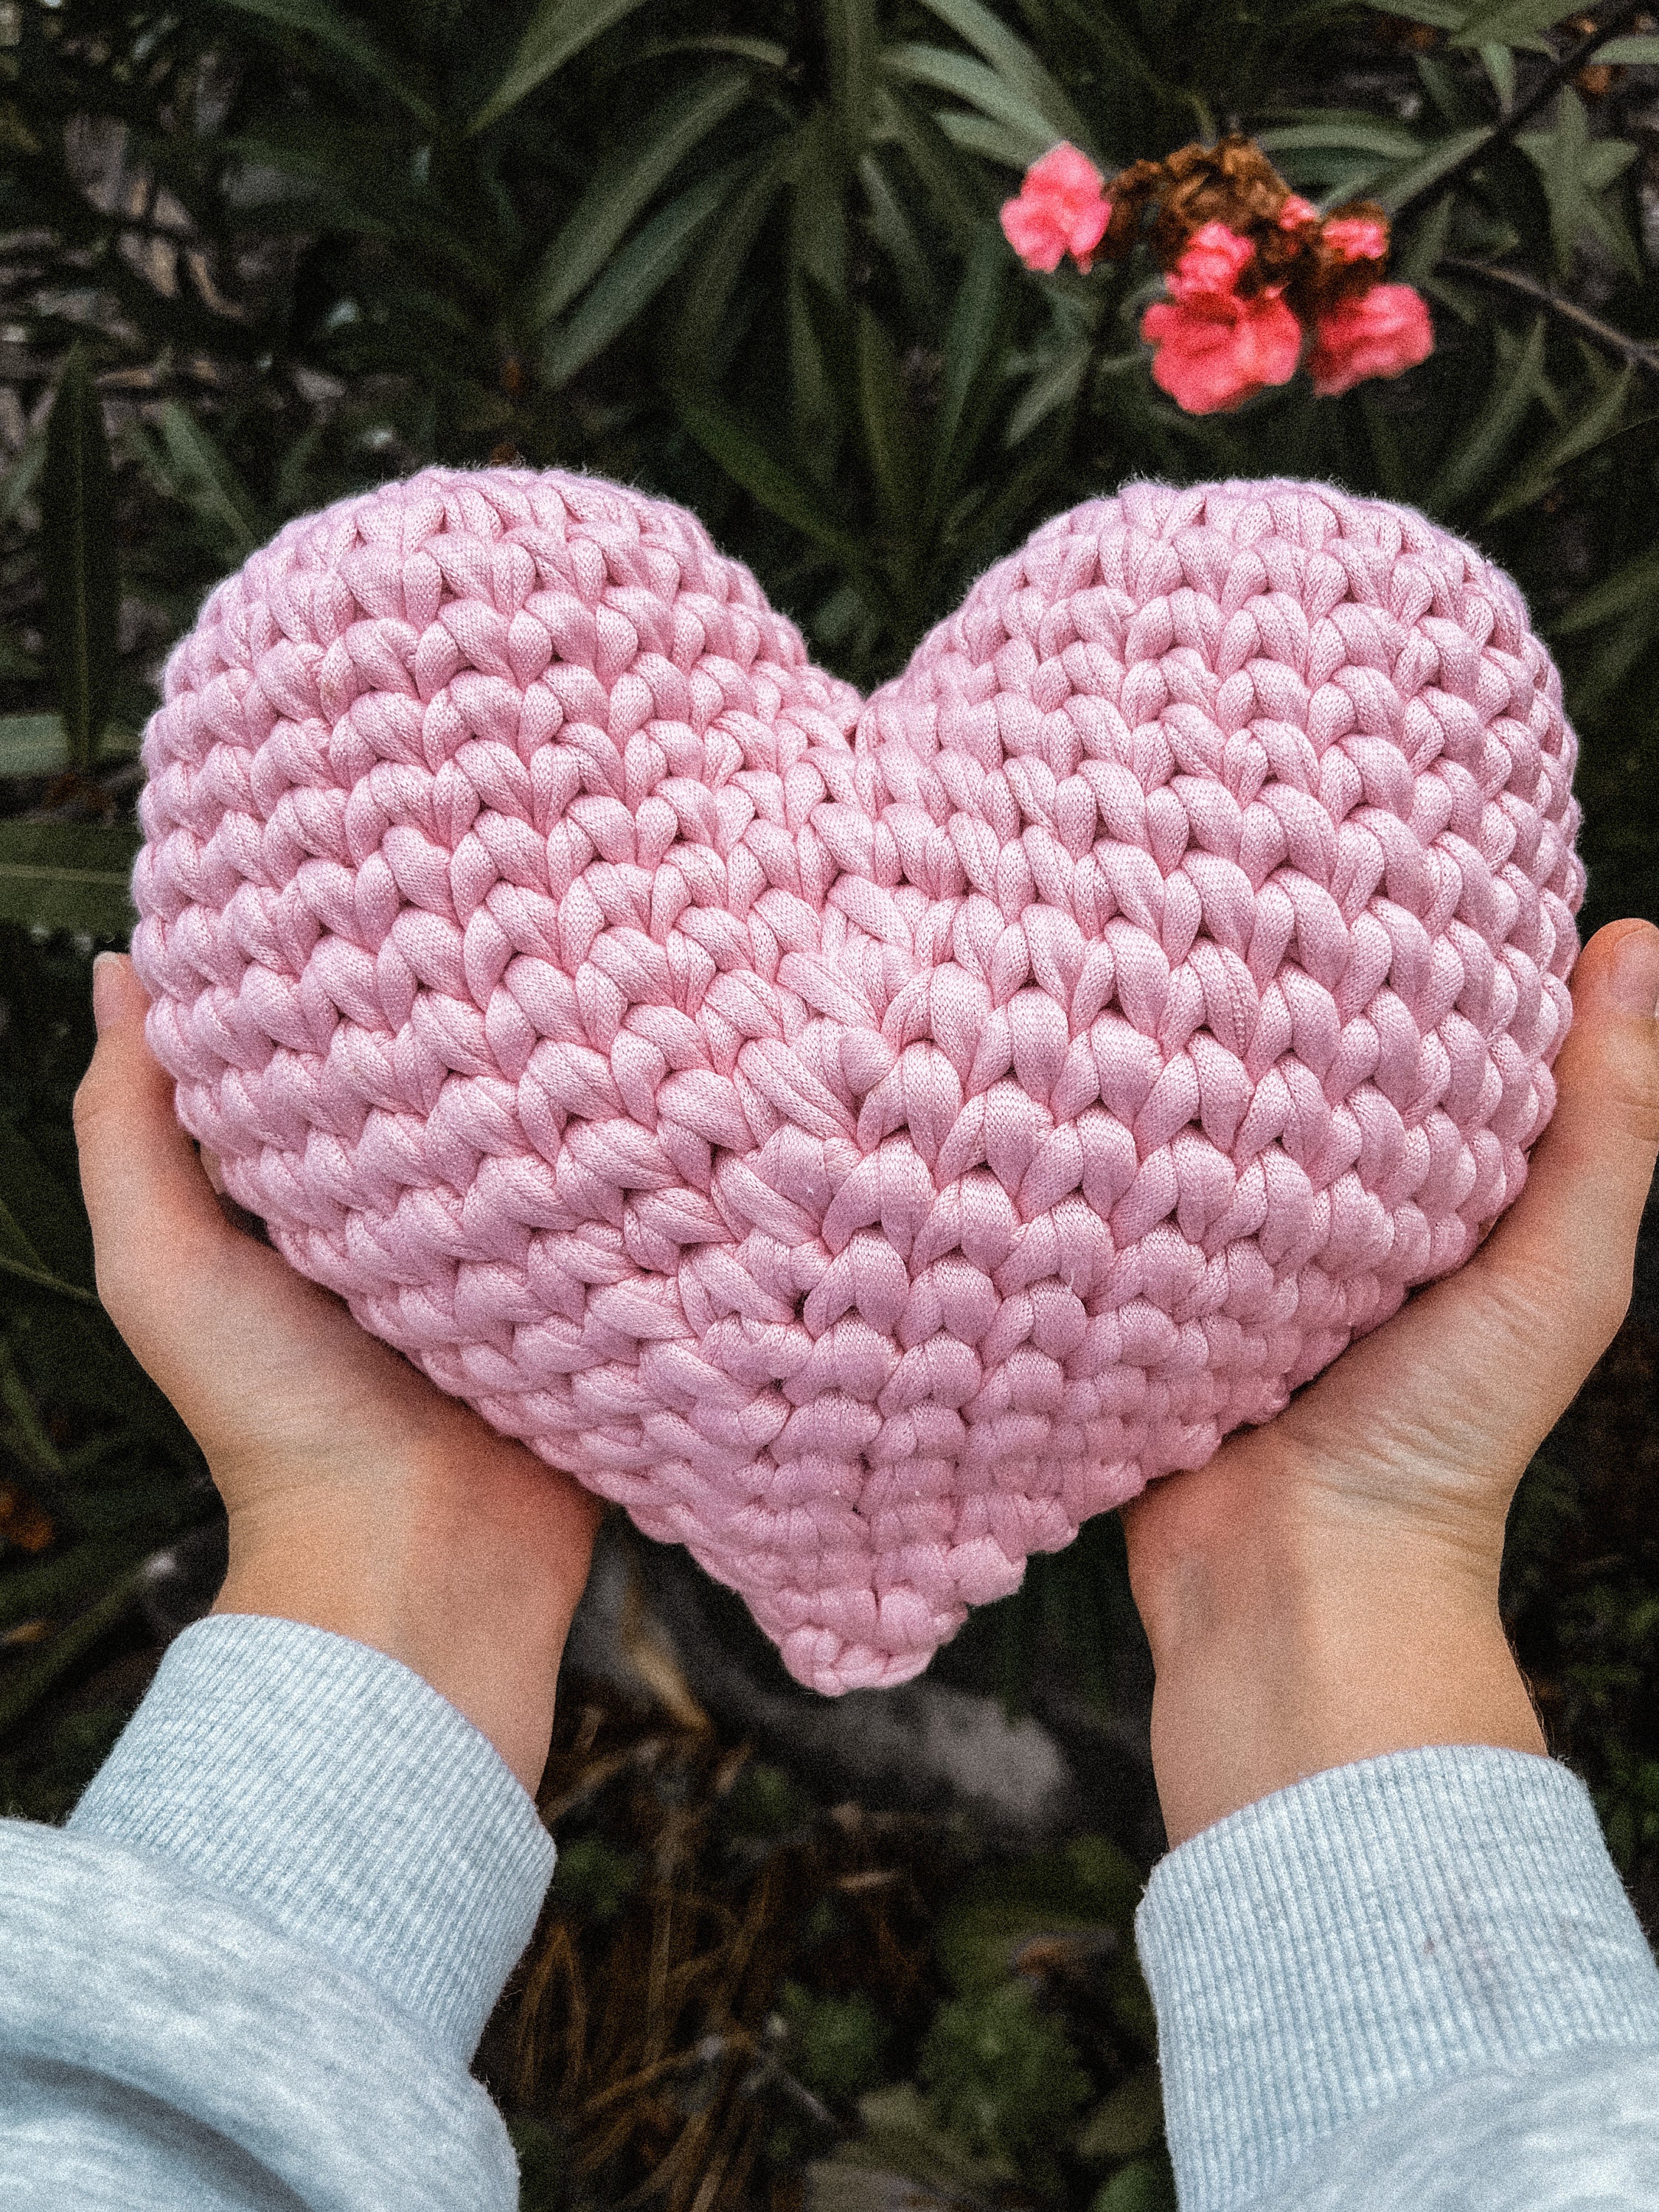 lilleliis - Chunky T-shirt yarn + 12 mm crochet hook = ♥️ Read the story  and find a link to my free amigurumi heart pattern 👉🏻   Spread the love!